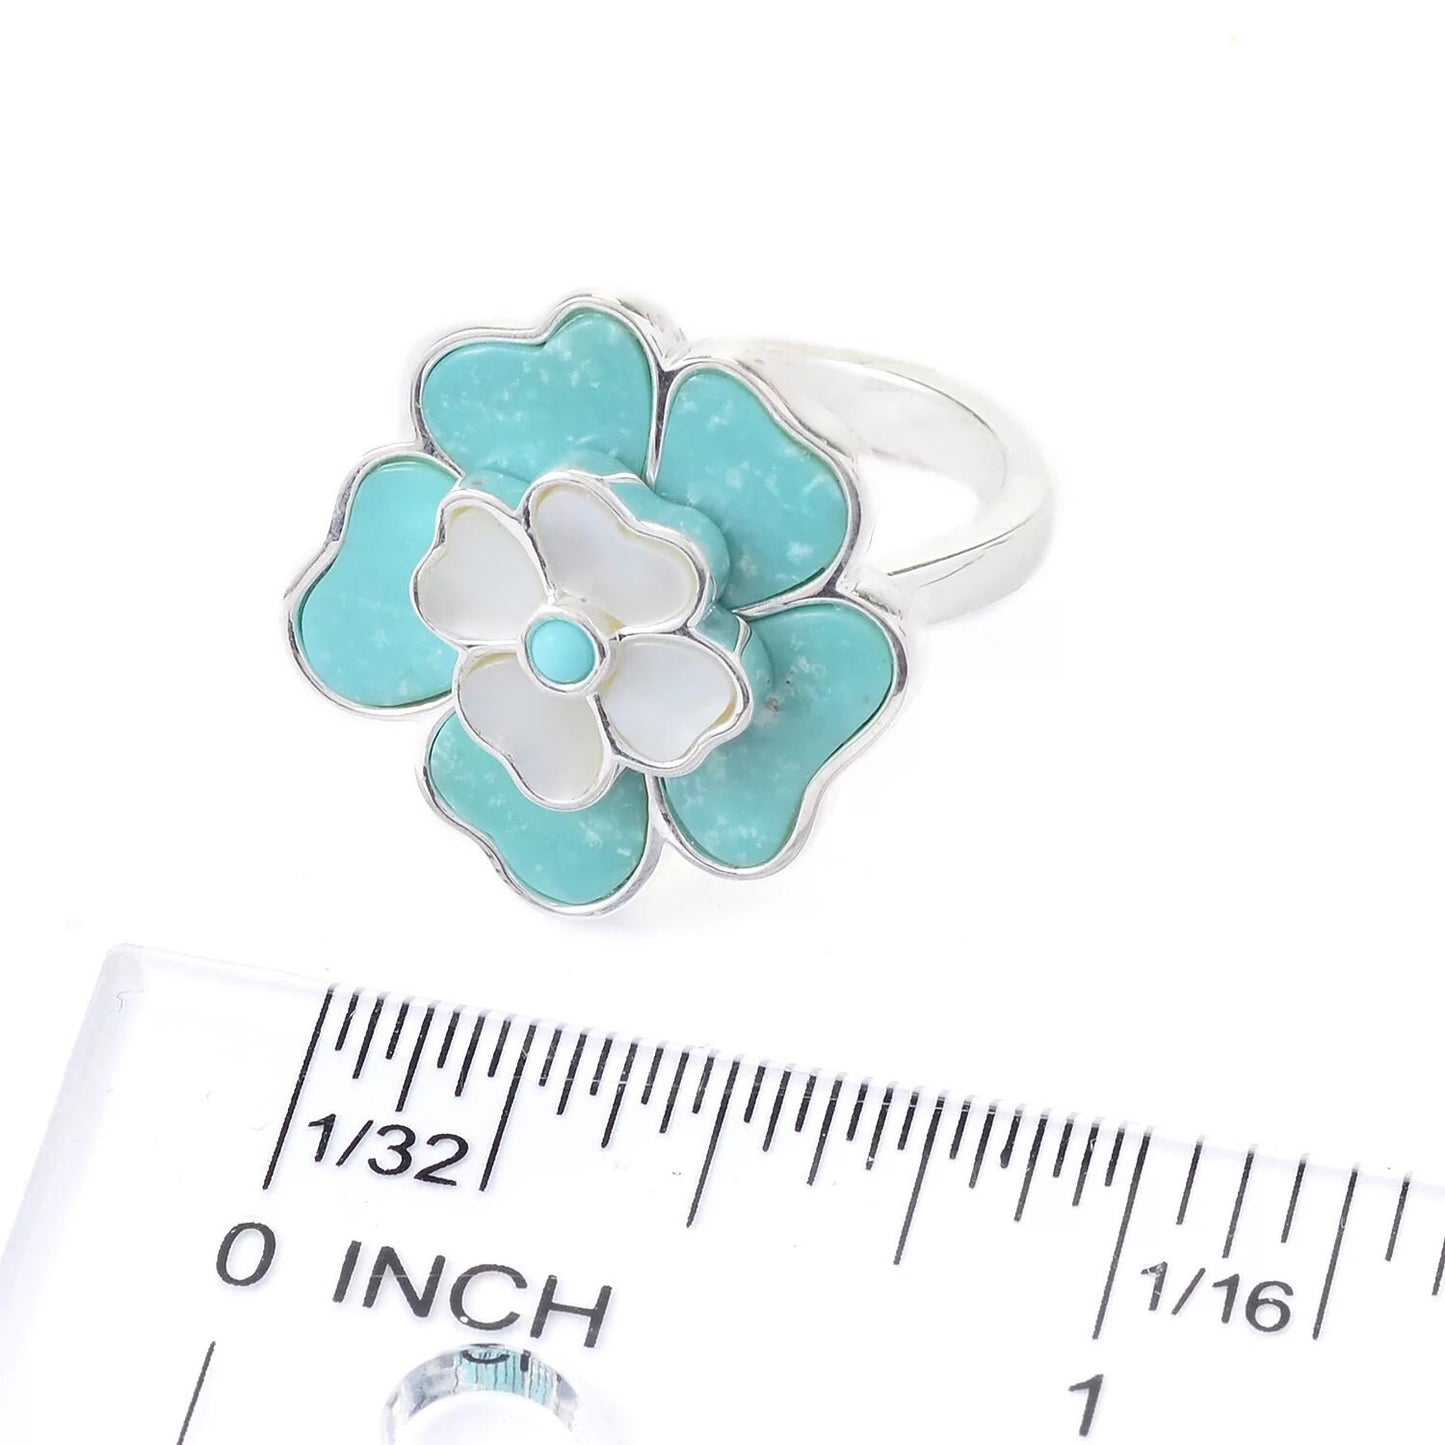 Natural Campitos Turquoise With Pearl Gemstone Ring 925 Sterling Silver Ring Boho Ring For Women Flower Shape Ring Fine Jewelry Gift For Her